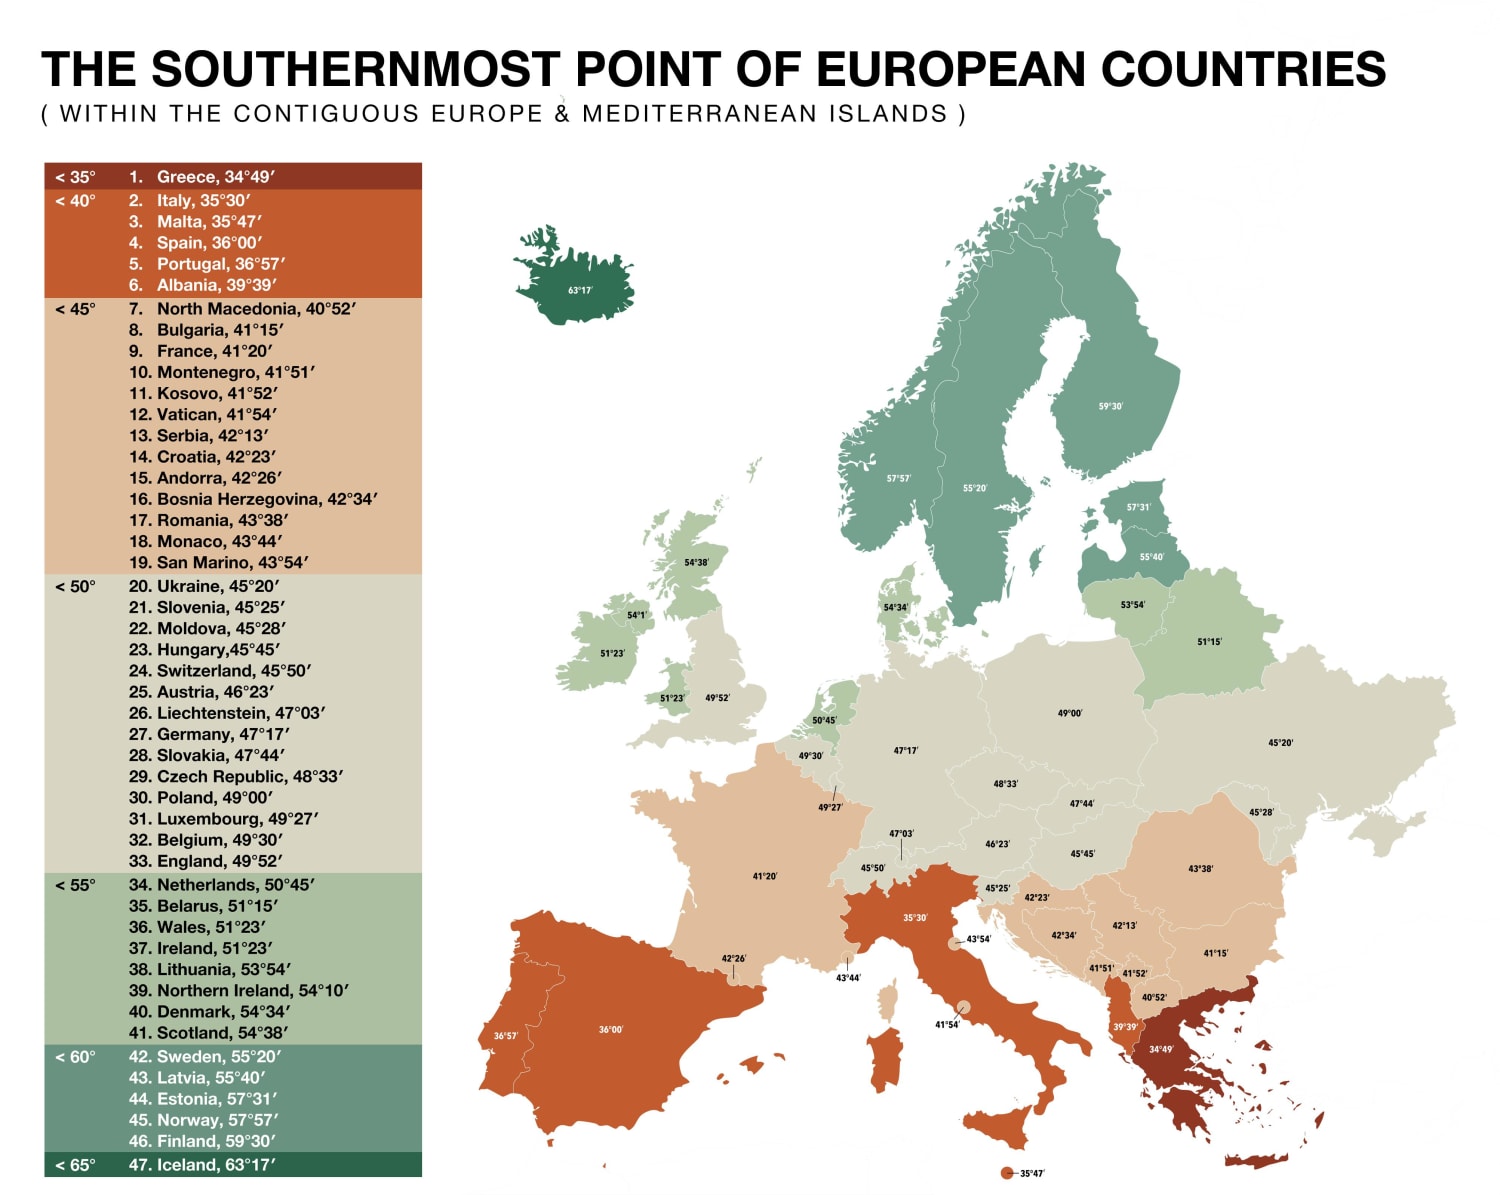 The sourthernmost point of European countries ( within the contiguous Europe + the Mediterranean islands )